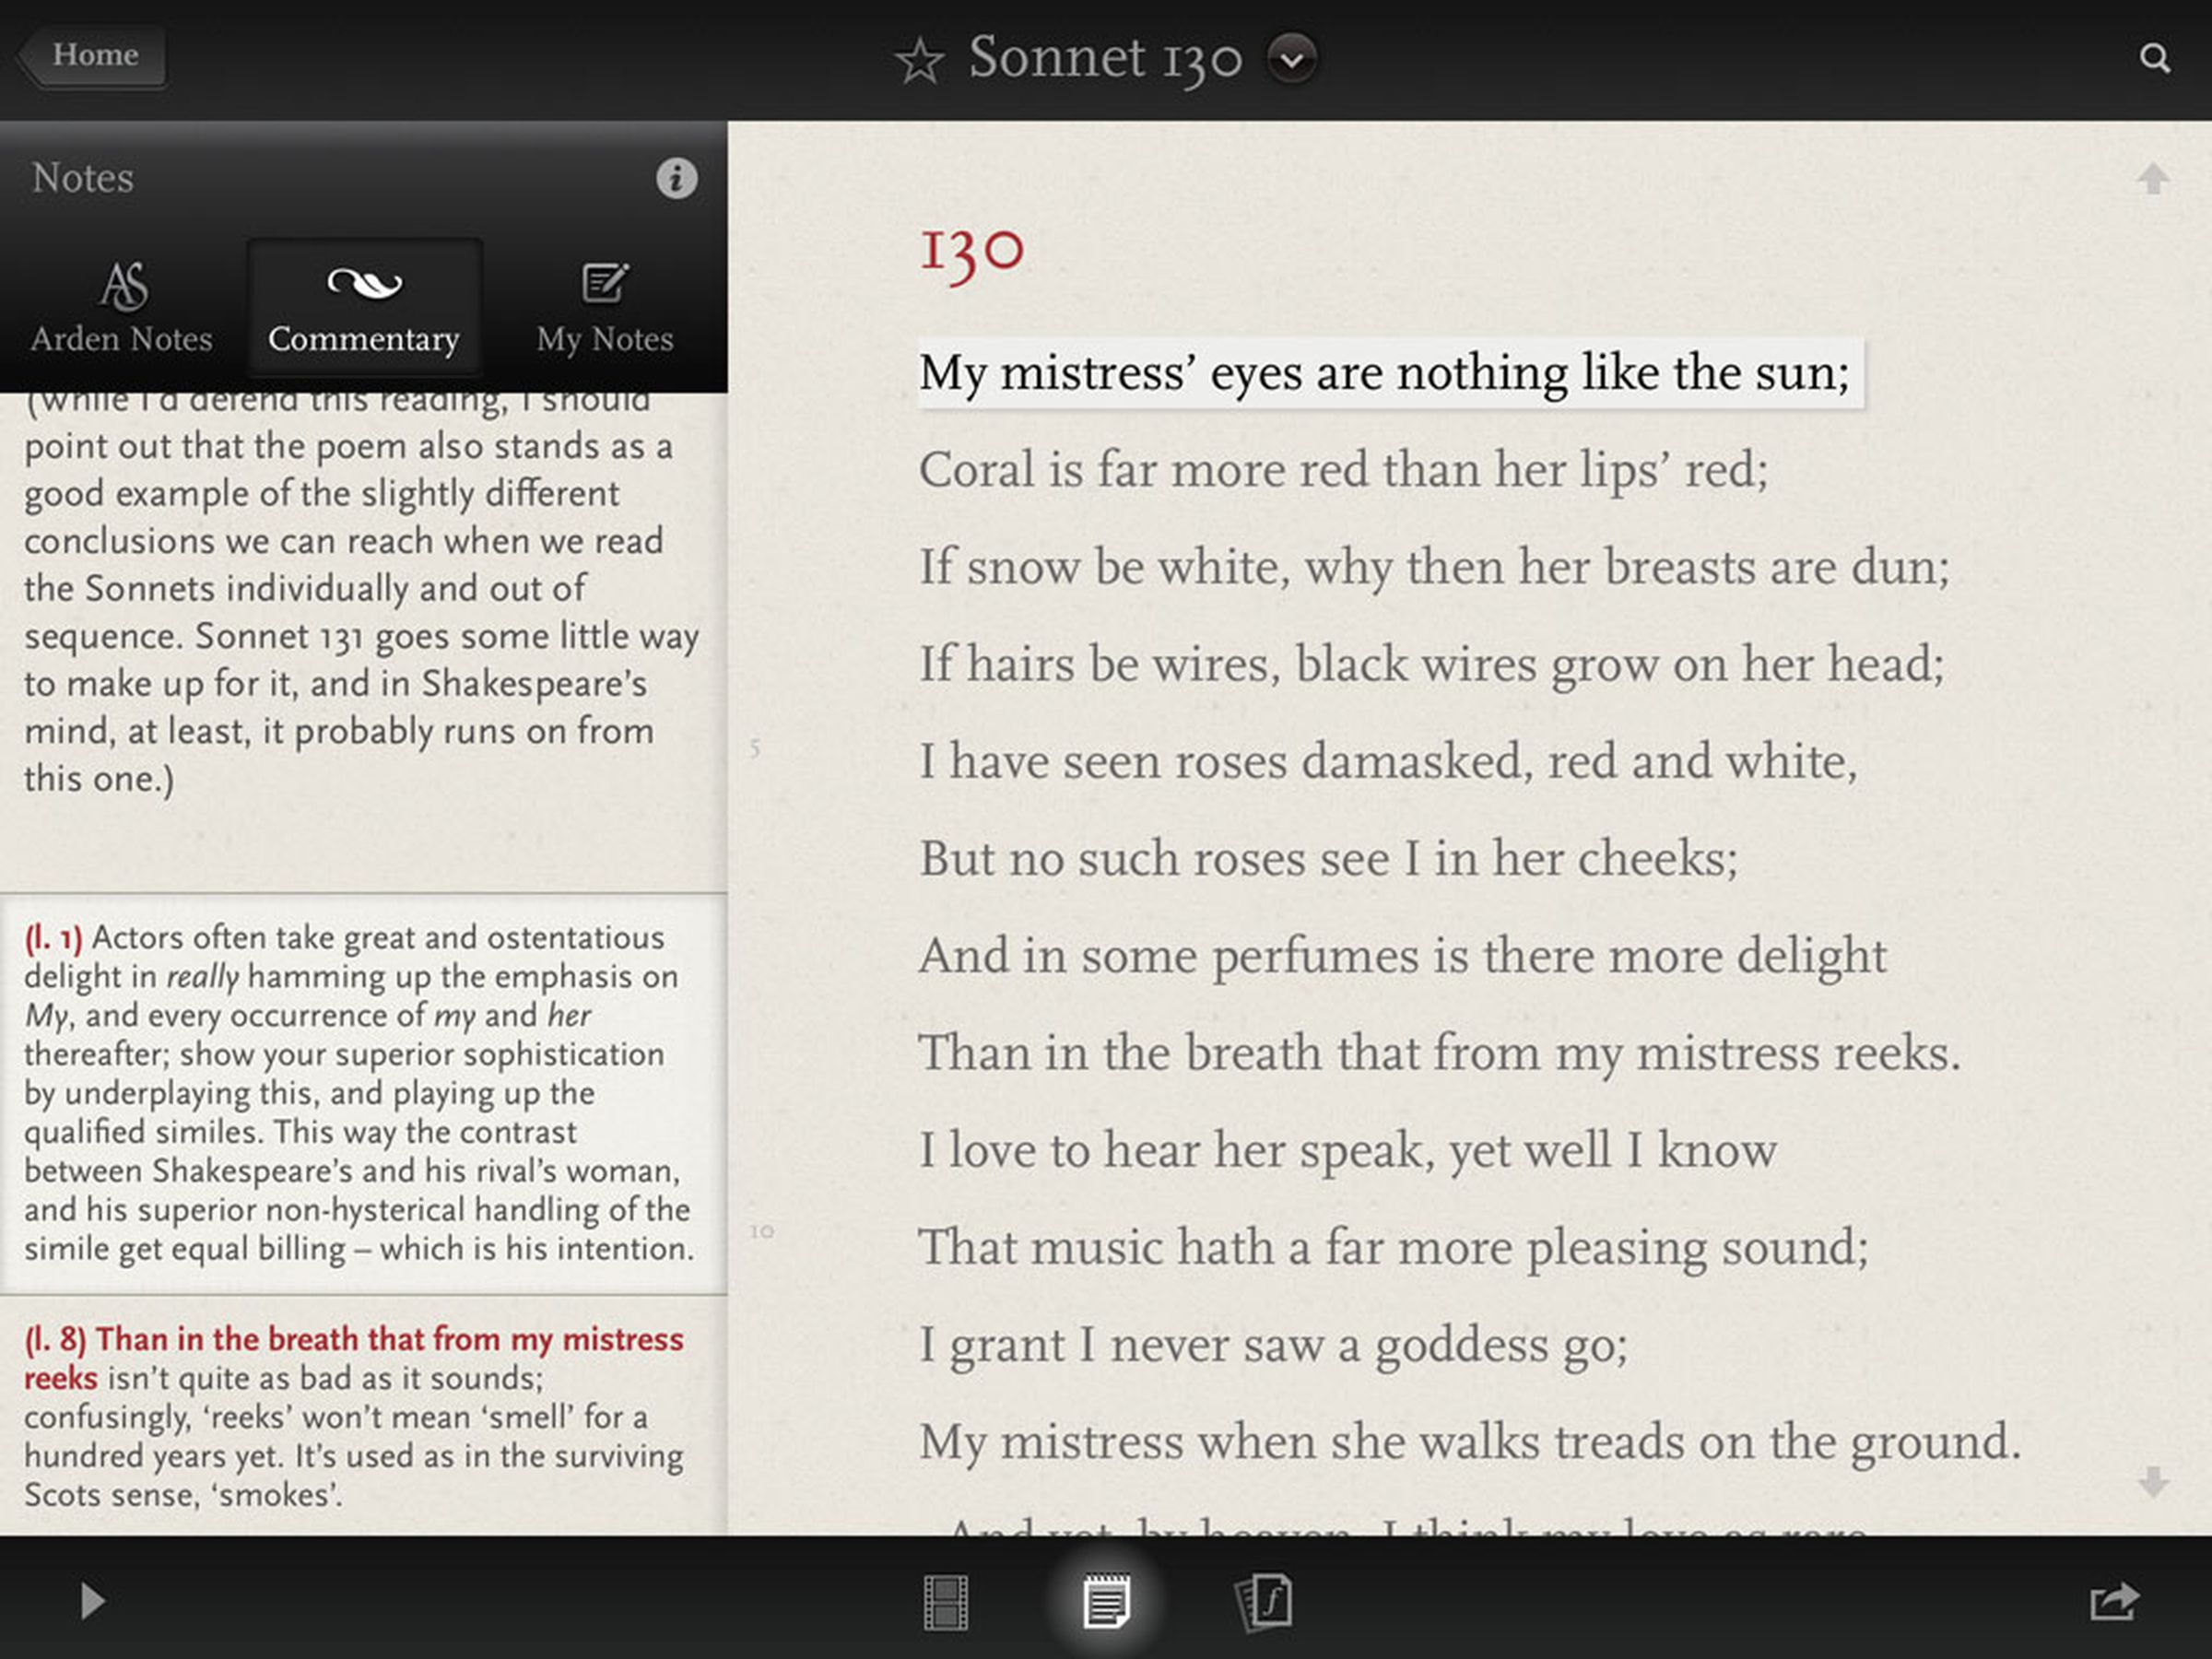 Shakespeare's Sonnets Image Gallery